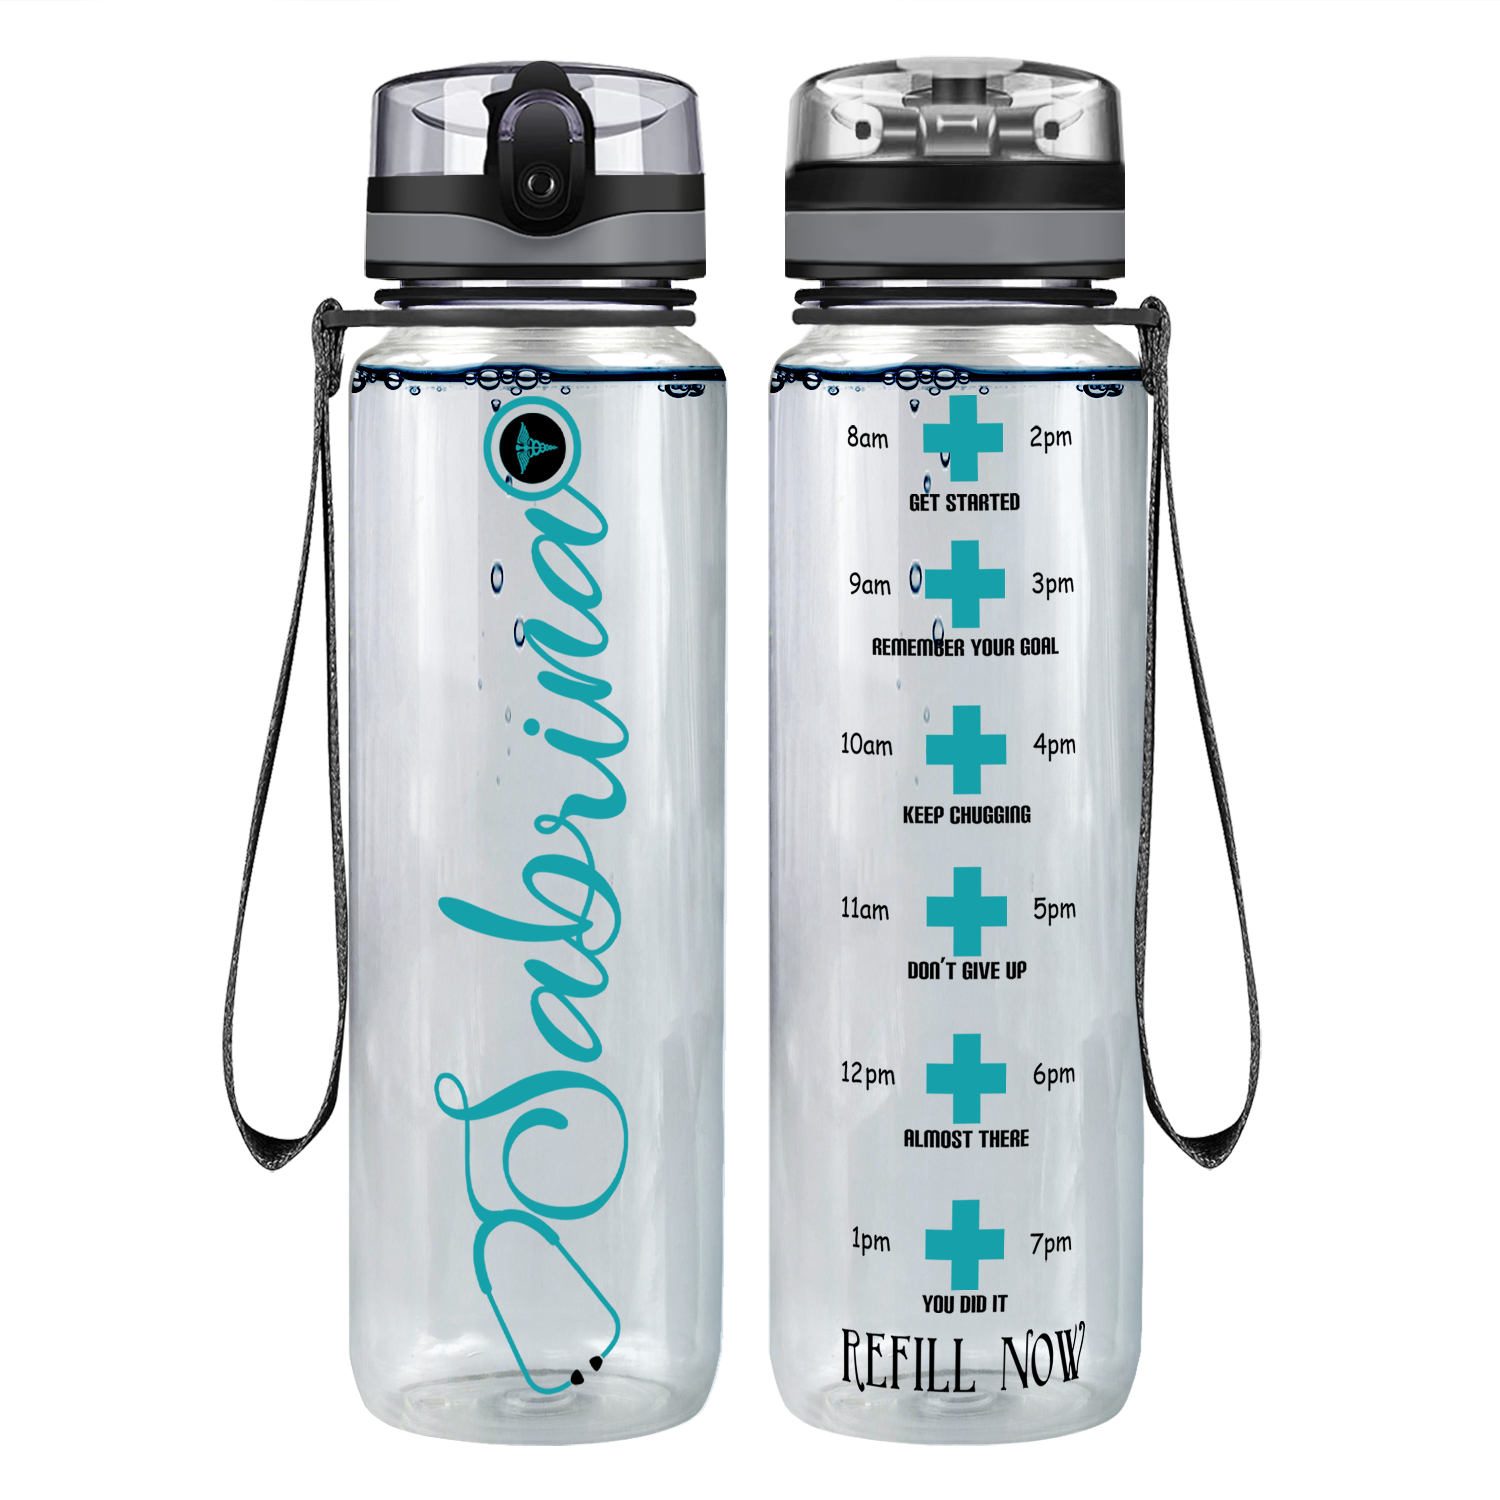 Personalized Nurse Life 32oz Motivational Water Bottle With Time Marker -  Jolly Family Gifts